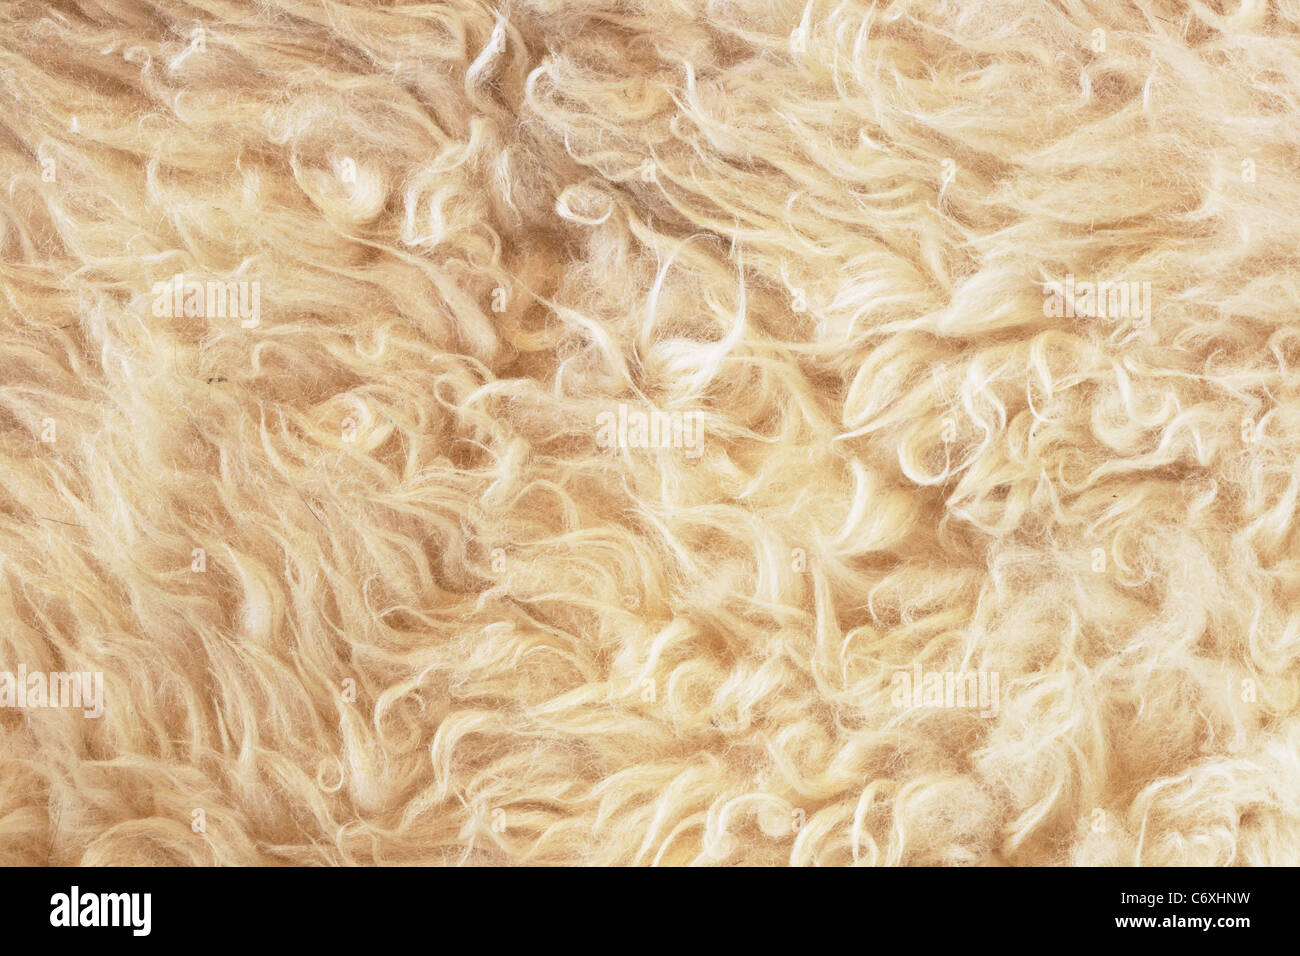 gray woolly sheep fleece for background texture Stock Photo